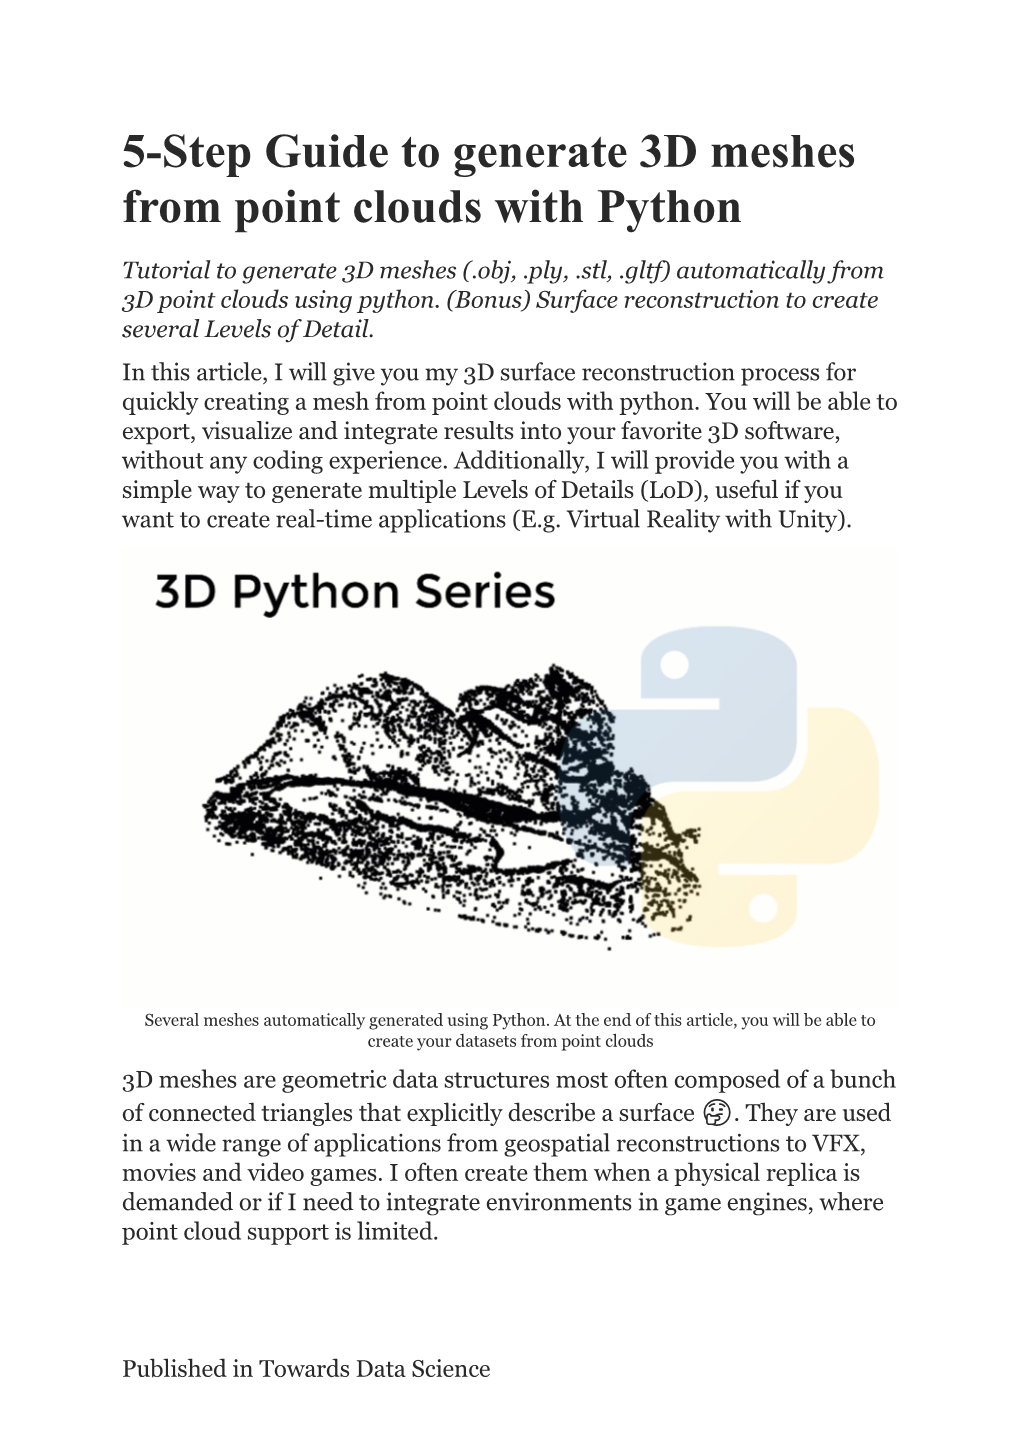 5-Step Guide to Generate 3D Meshes from Point Clouds with Python